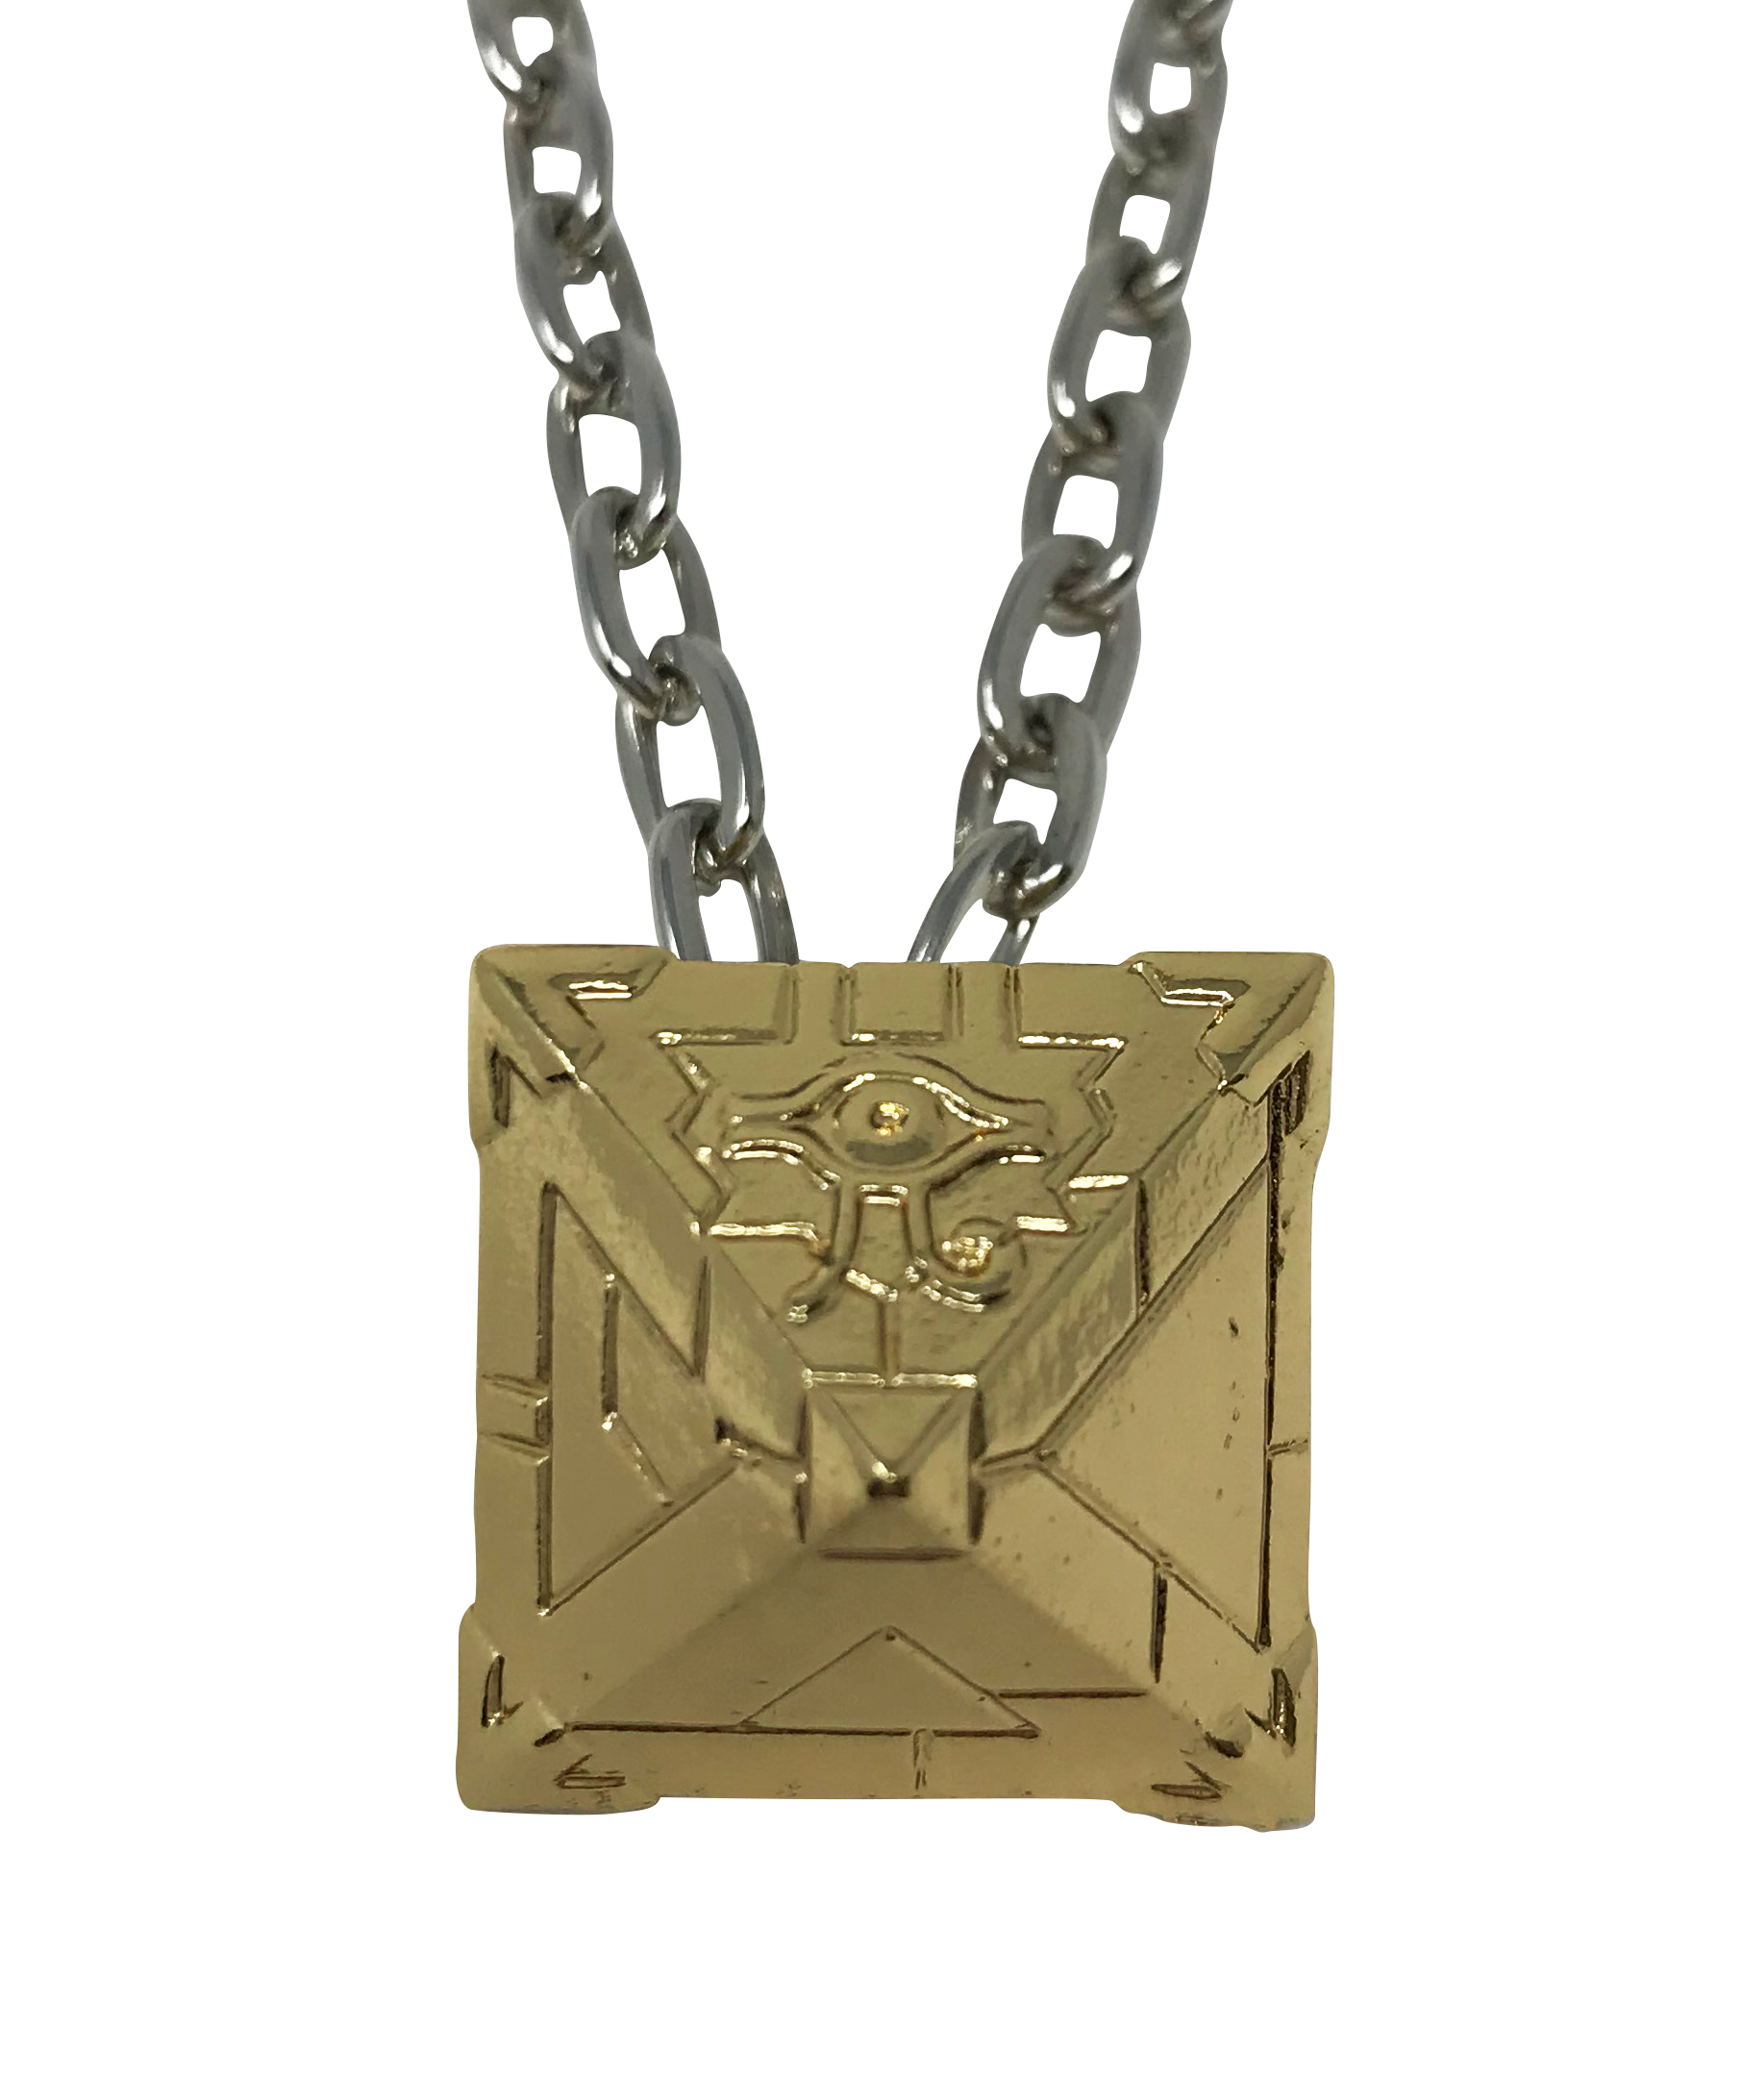 Yu Gi Oh! Gold Millennium Artifact Metal Pendant Necklace Chain Collection  gift | eBay